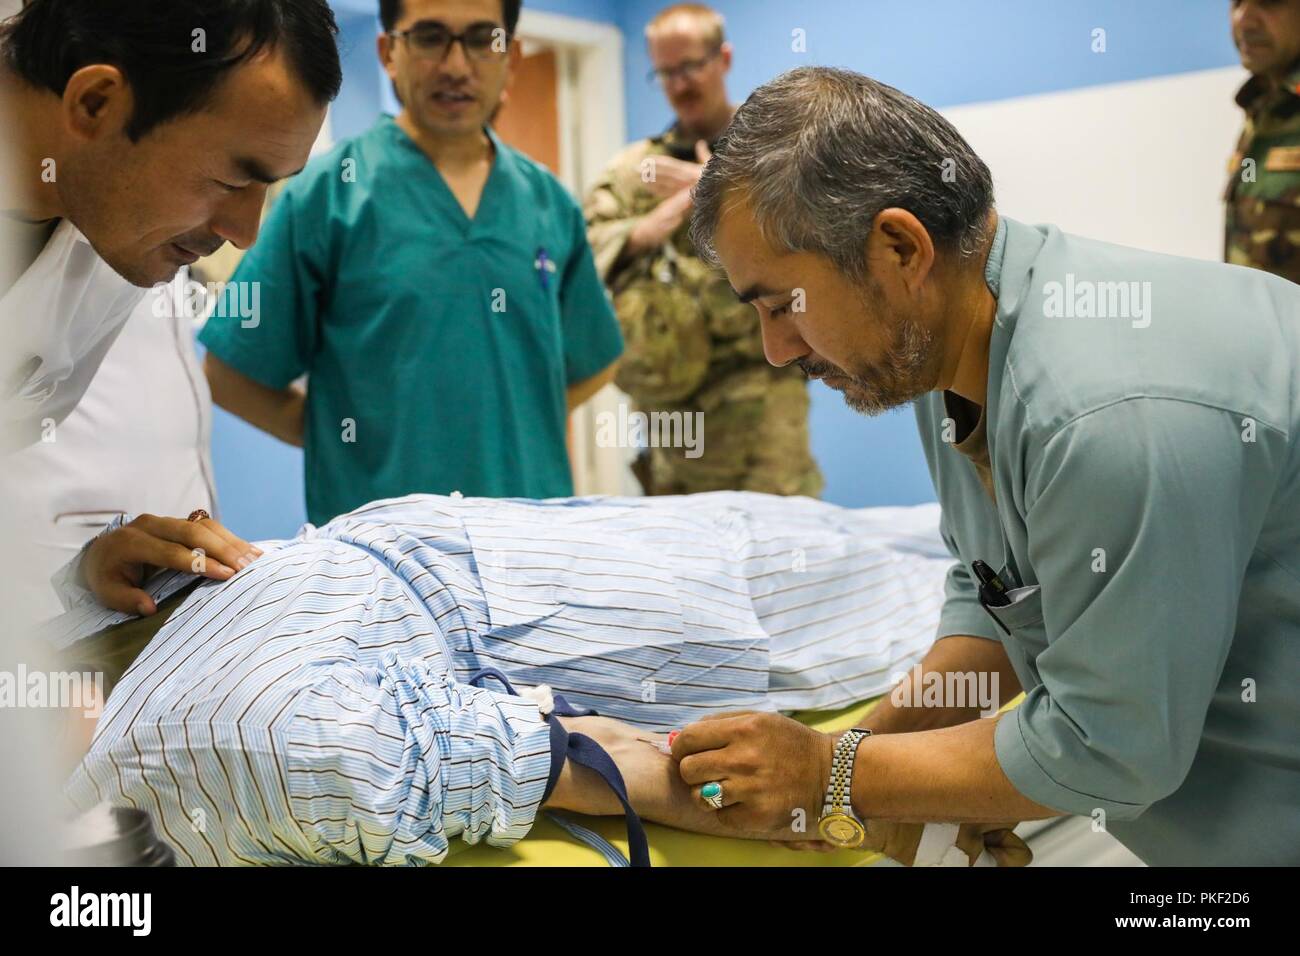 KANDAHAR PROVINCE, Afghanistan (August 5, 2018) -- Afghan radiology technicians prepare a patient for a body scan, August 5, 2018, after receiving advice from U.S. Navy Lt. Cdr. Justin S. Clark, radiology technician for Kandahar Airfield NATO Role III Multinational Medical Unit, during a medical advisory visit at Kandahar Regional Military Hospital, Camp Hero in Kandahar, Afghanistan. Staff members from the Role III conduct routine visits to KRMH to train and advice Afghan medical staff. Stock Photo